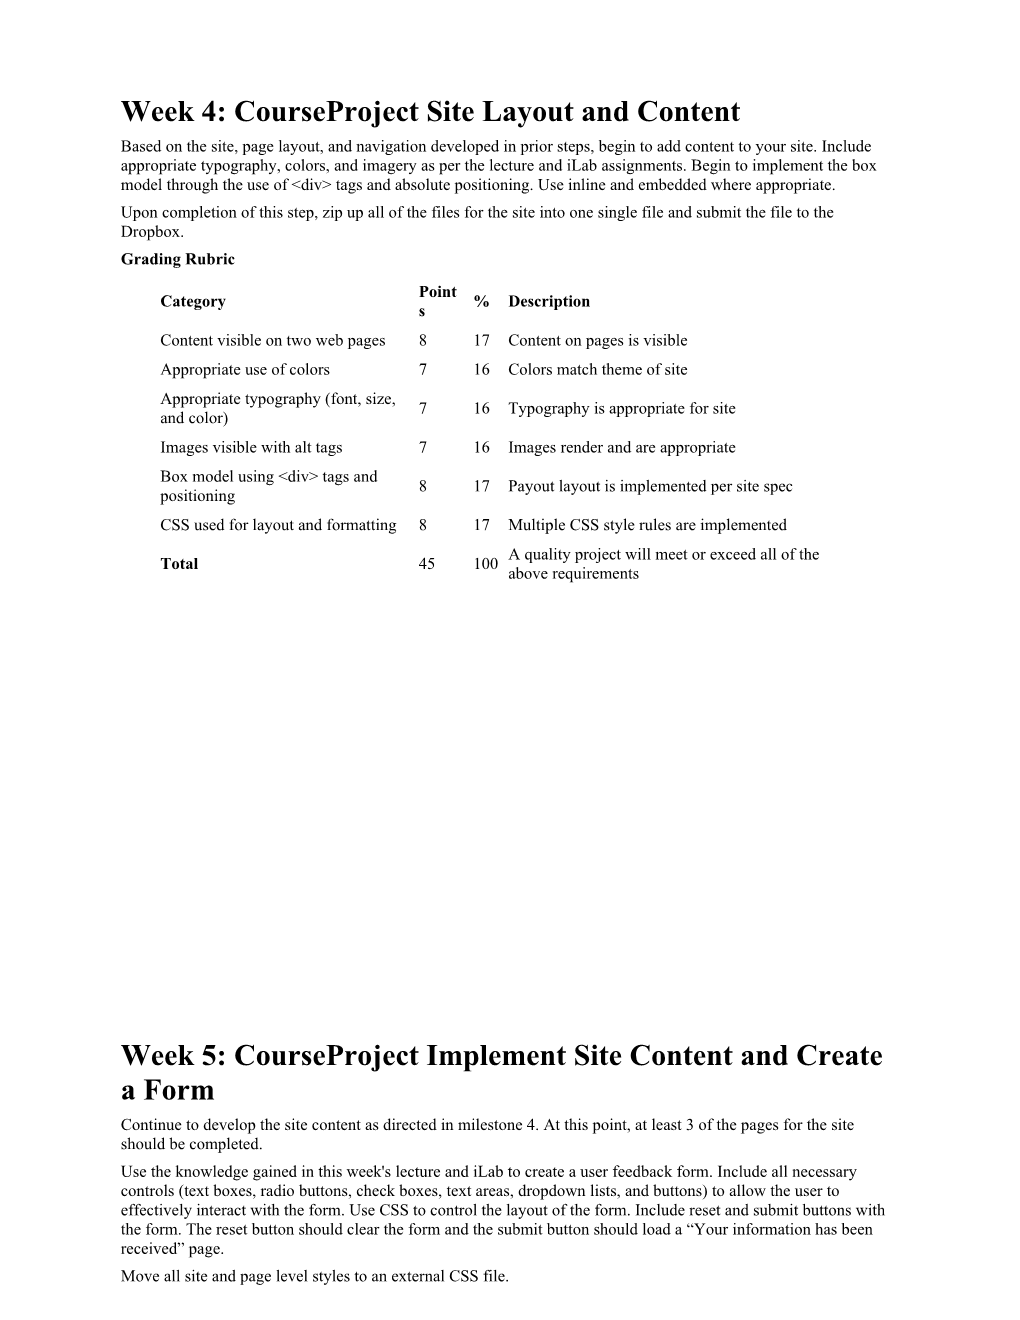 Week 4: Courseproject Site Layout and Content